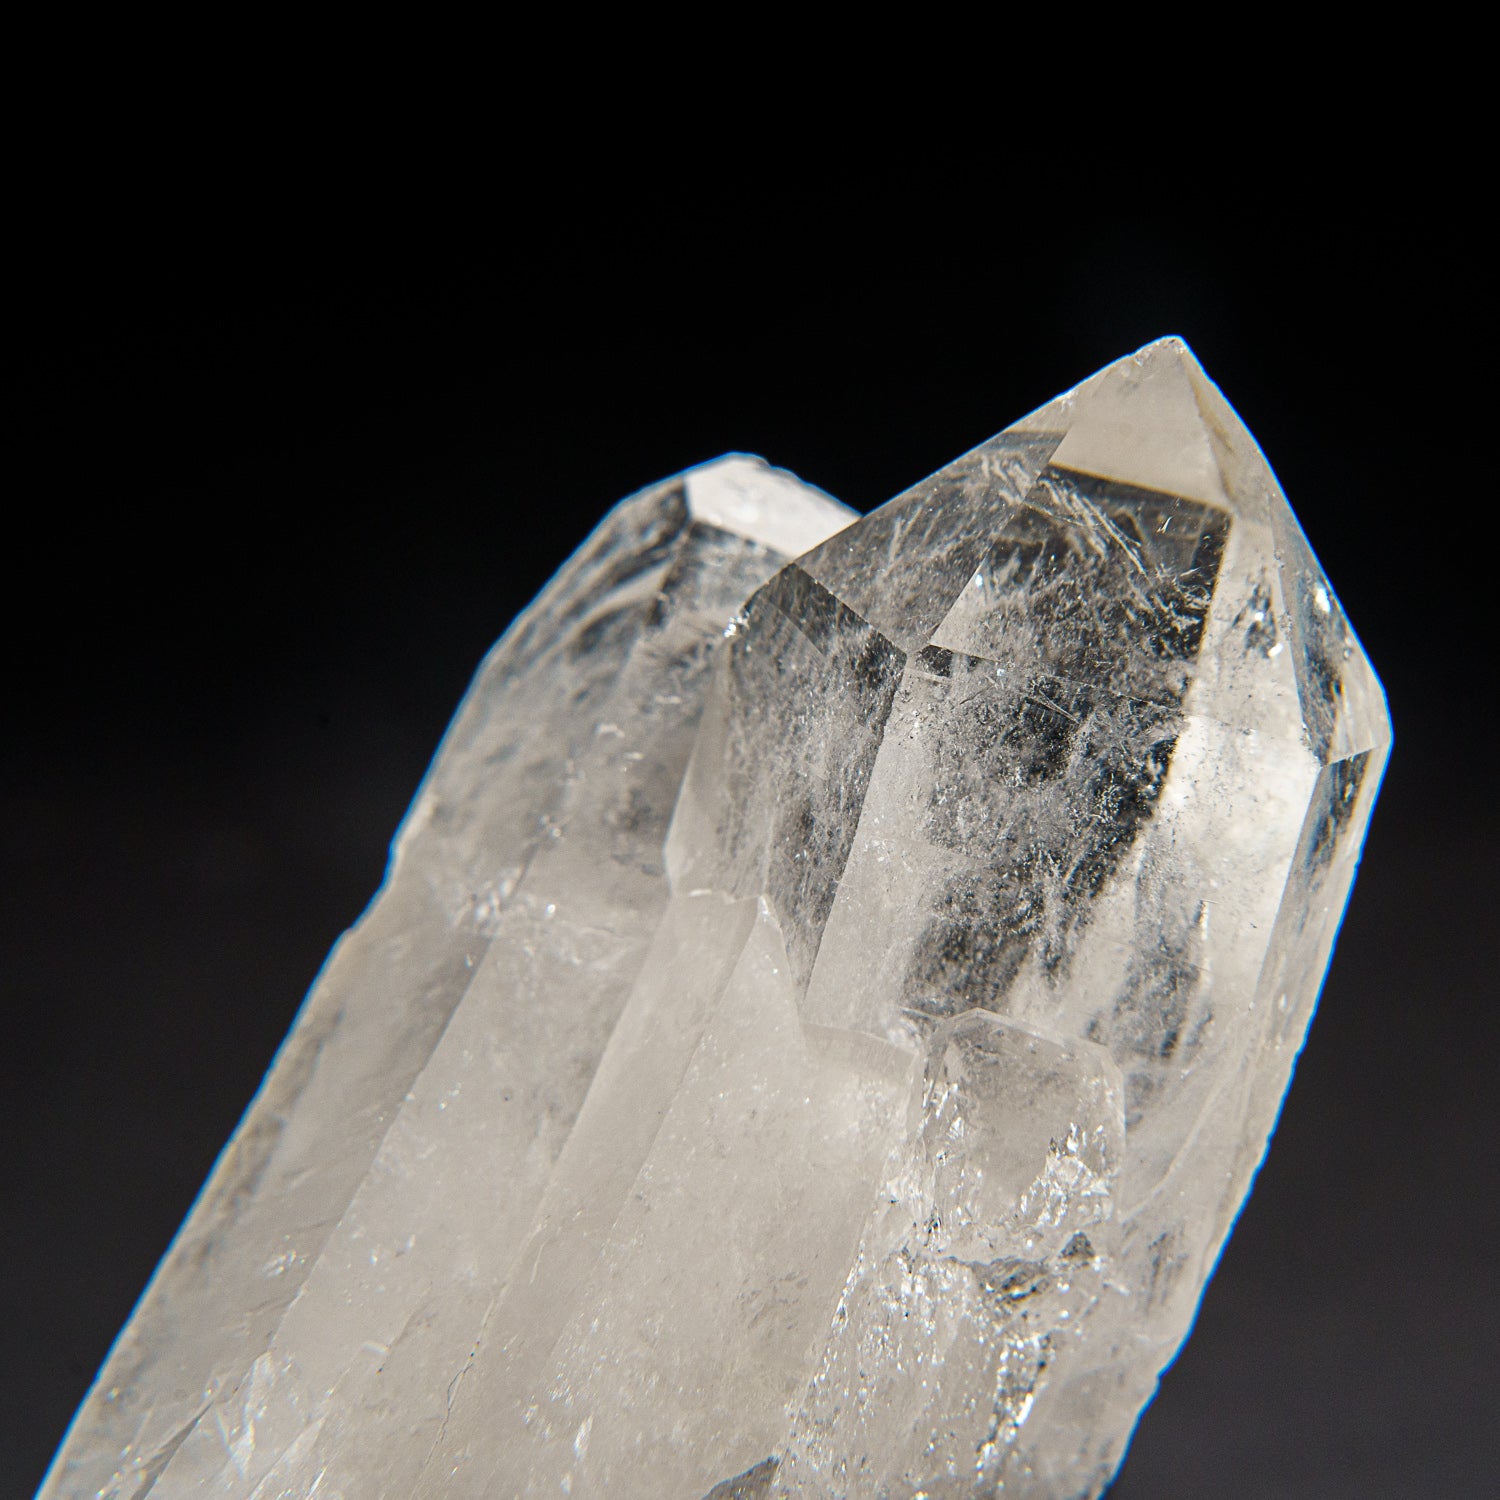 Genuine Clear Quartz Crystal Cluster Point from Brazil (320 grams)